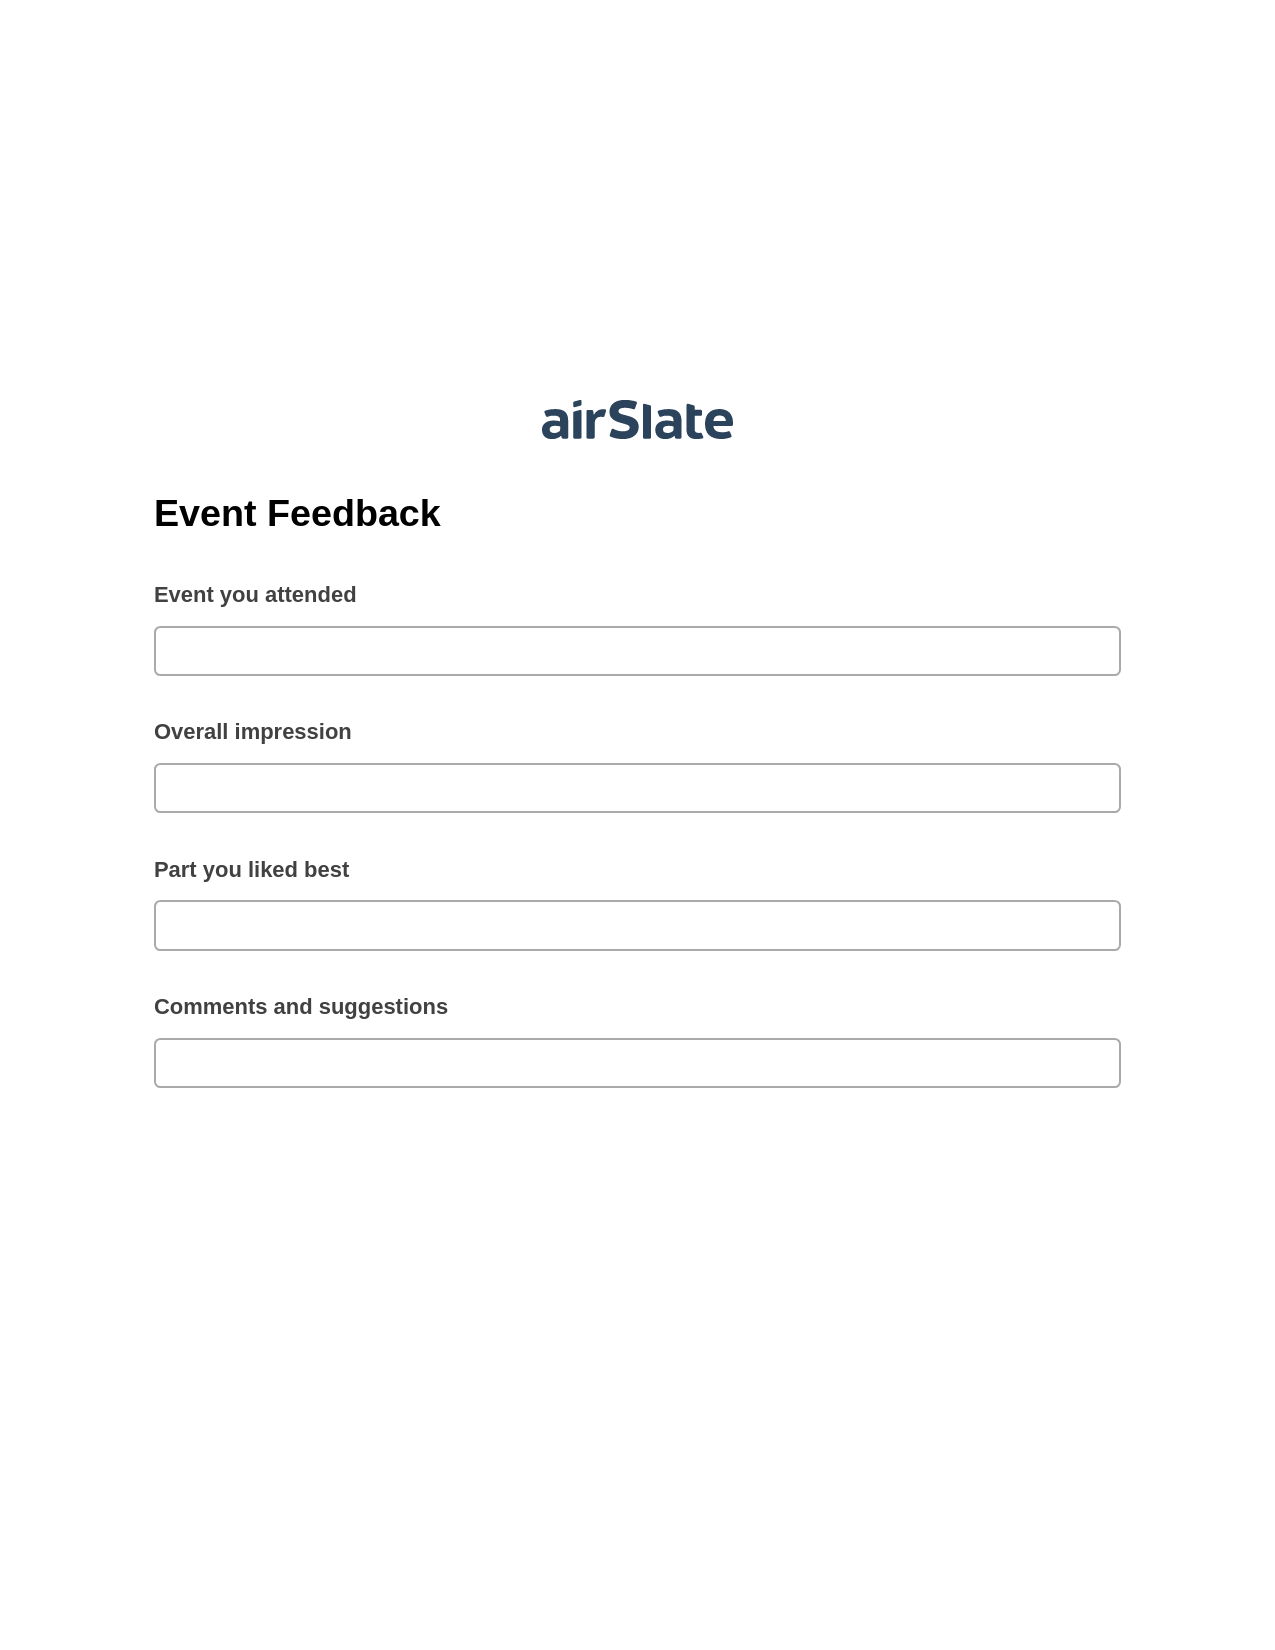 Event Feedback Pre-fill from Salesforce Record Bot, Assign Slate Name Bot, Slack Two-Way Binding Bot